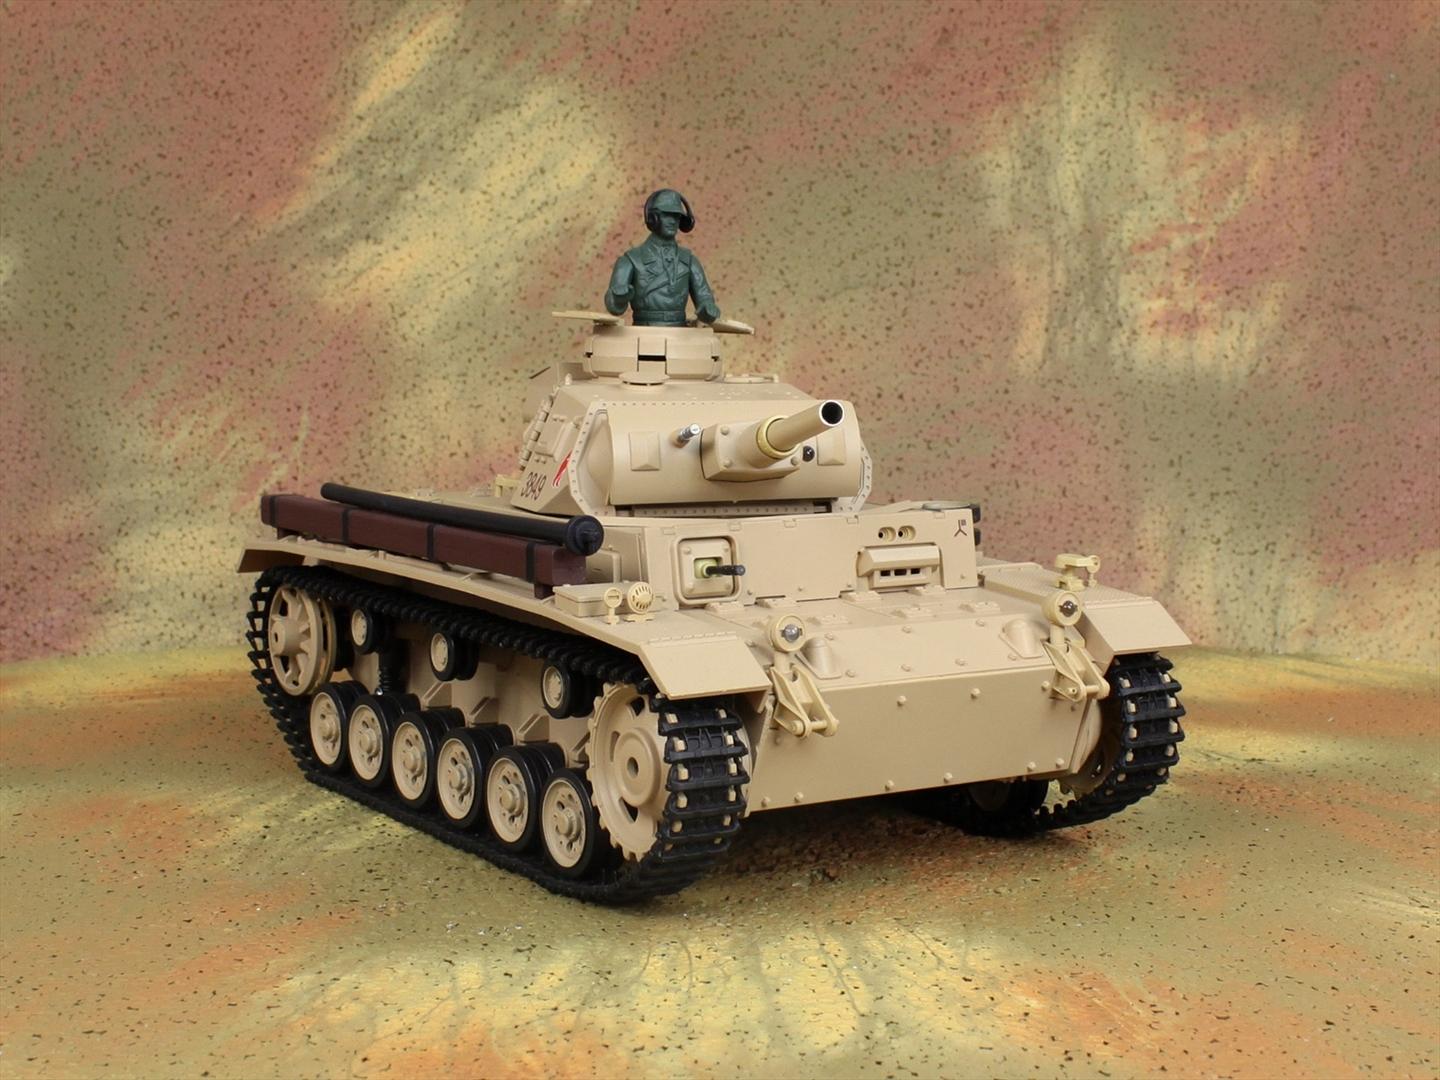 HENG-LONG Toys 3849 RC Scale Model Tank, World War II German Tauch Panzer III Ausf.H Remote Control Tank.